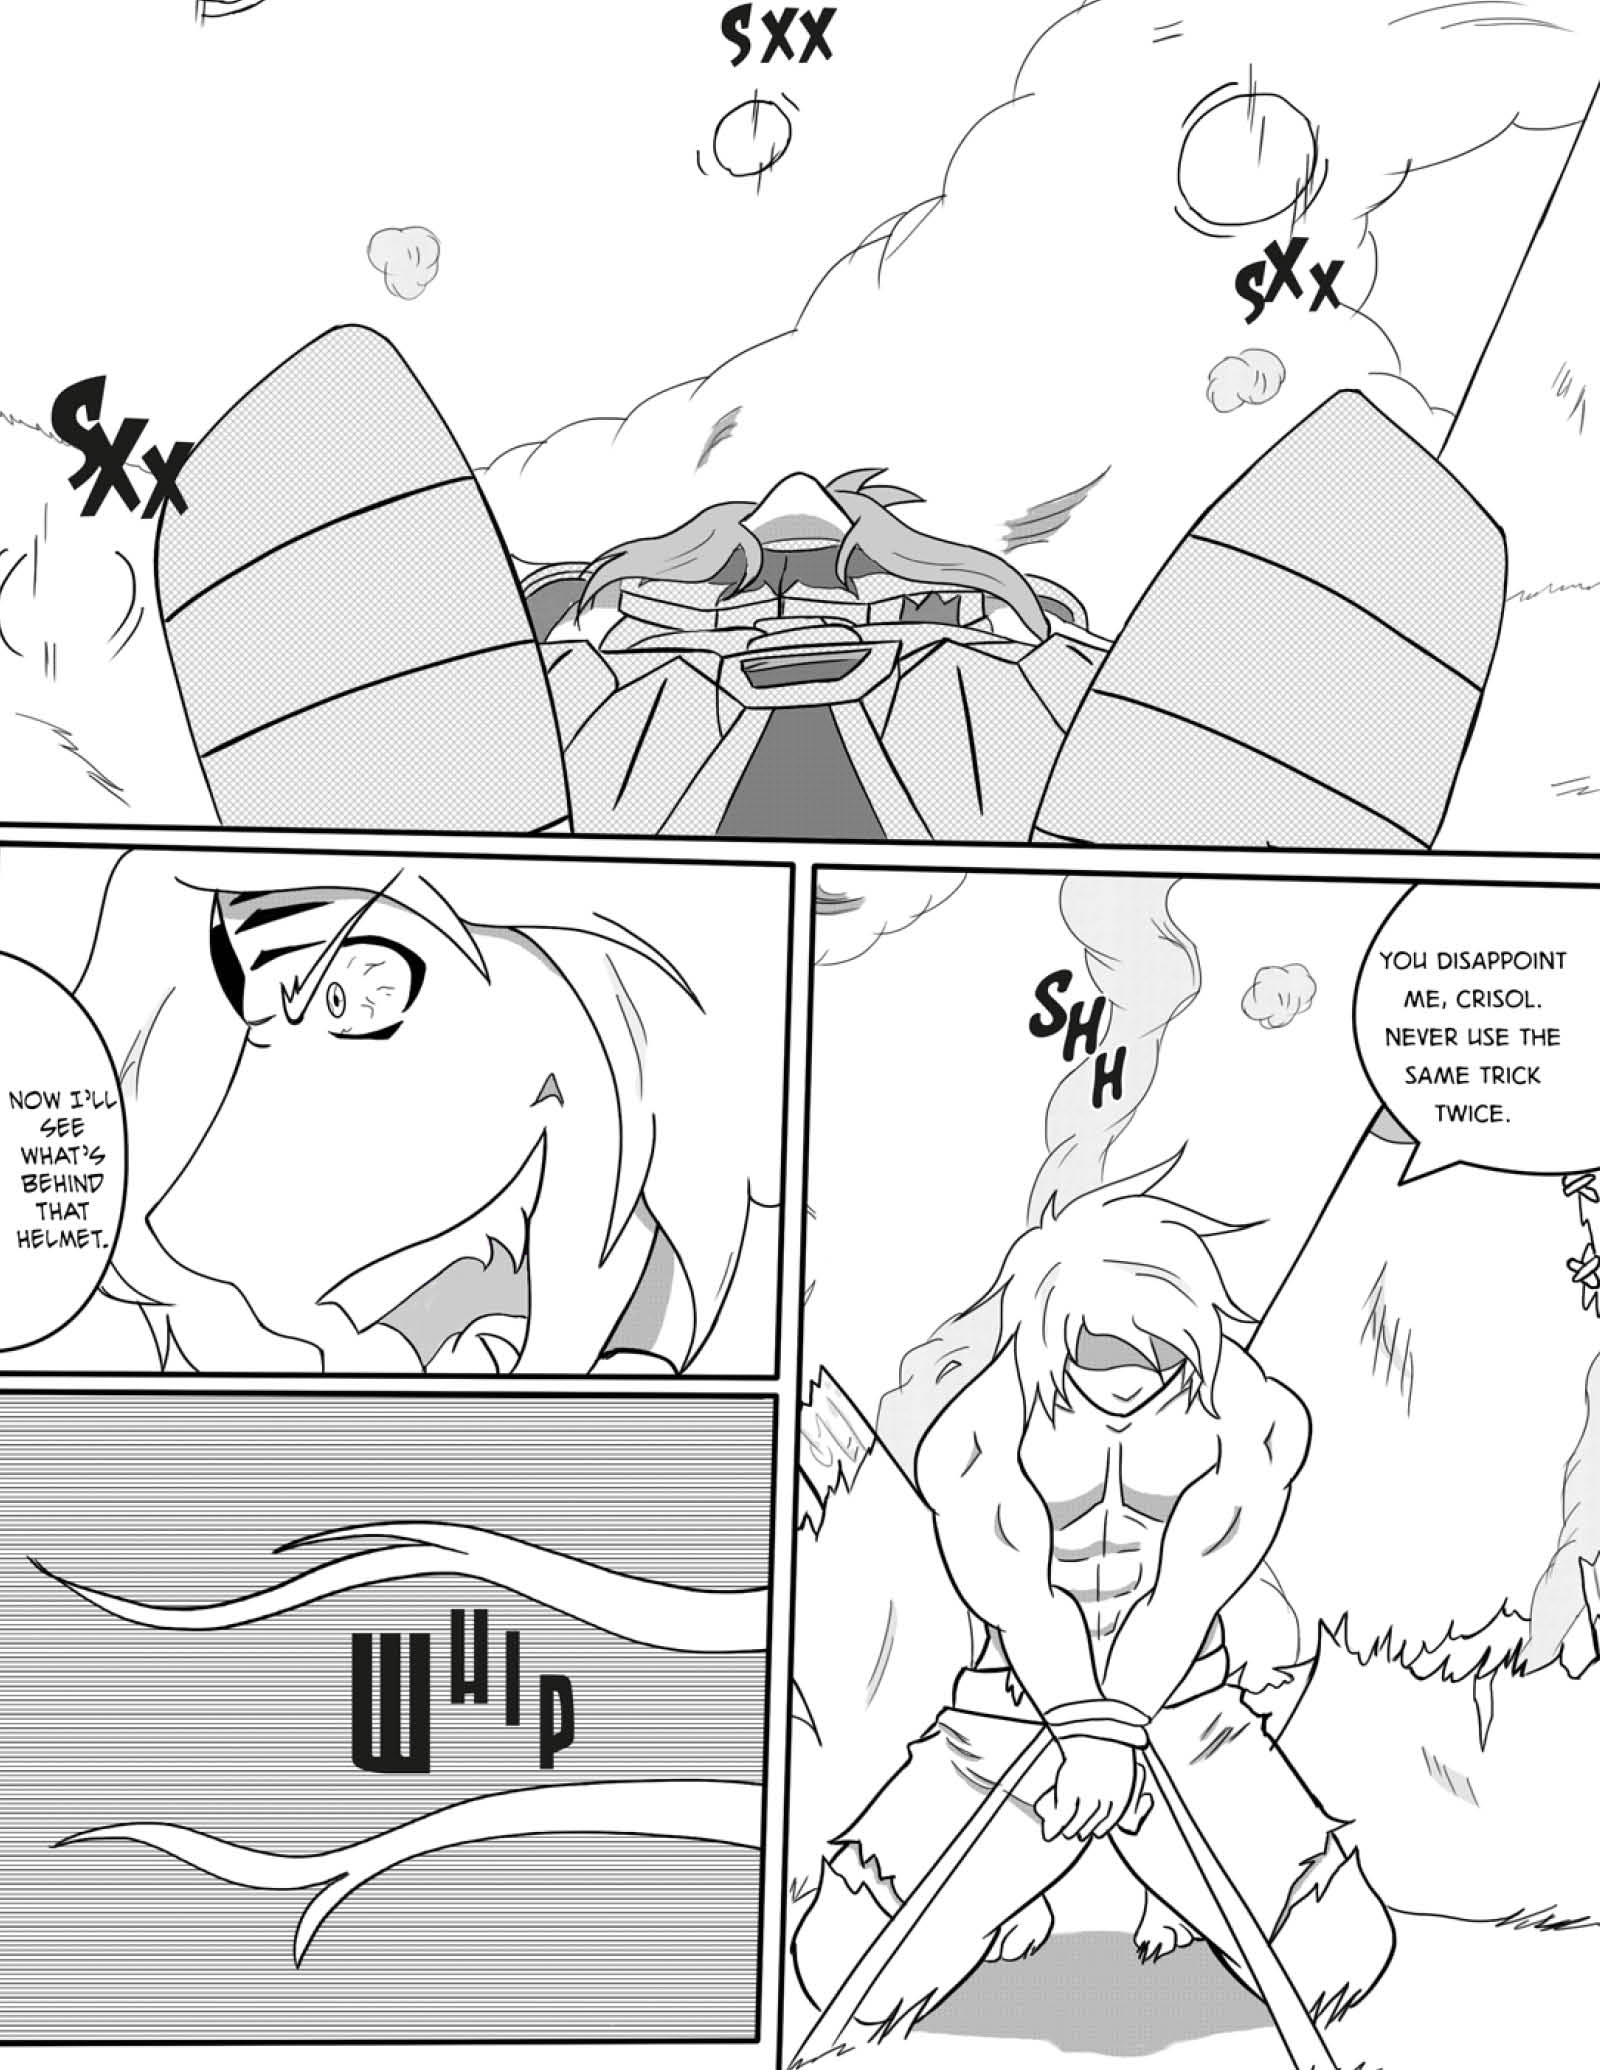 Series Dilan: the Chronicles of Covak - Chapter 8 - Page 8 - Language ENG